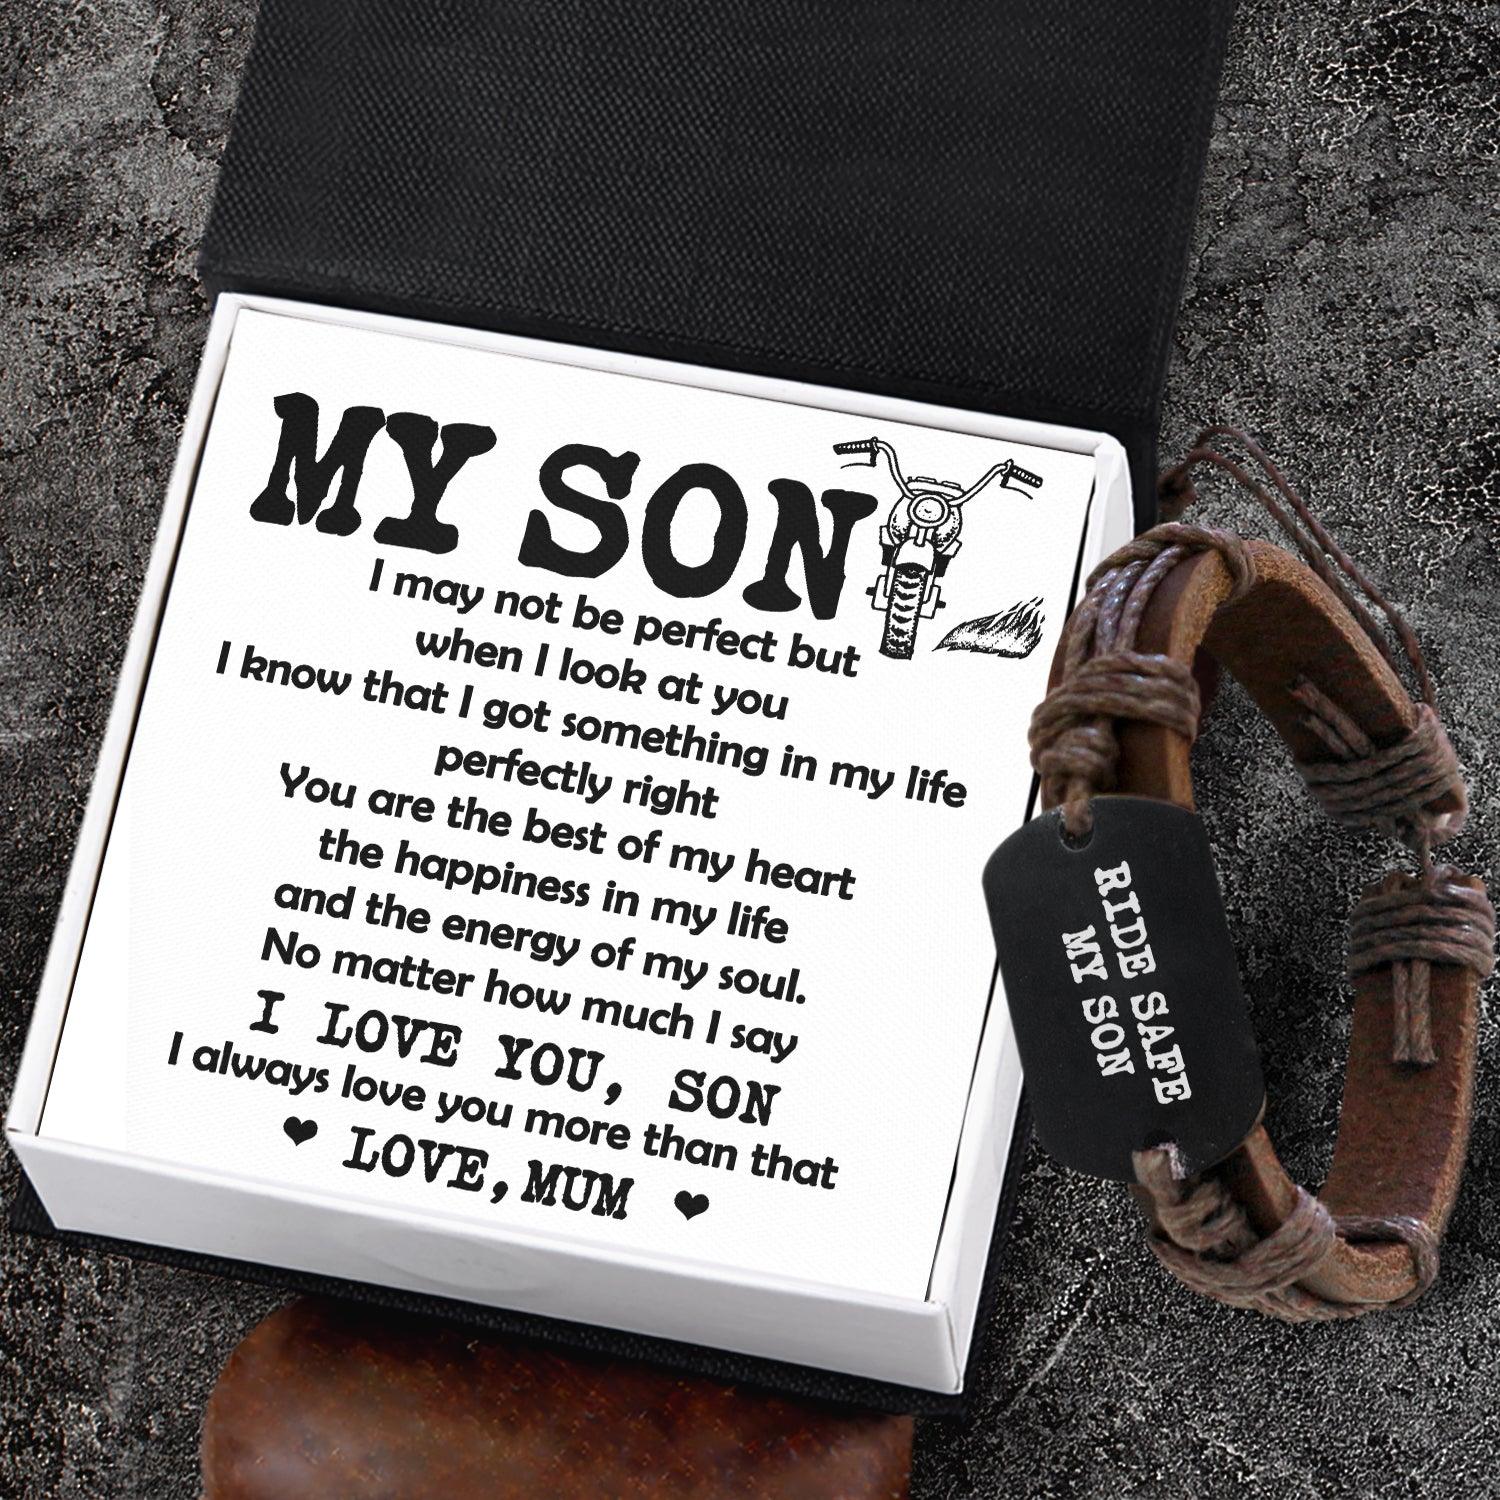 Leather Cord Bracelet - Biker - To My Son - I Love You, Son - Augbr16003 - Gifts Holder